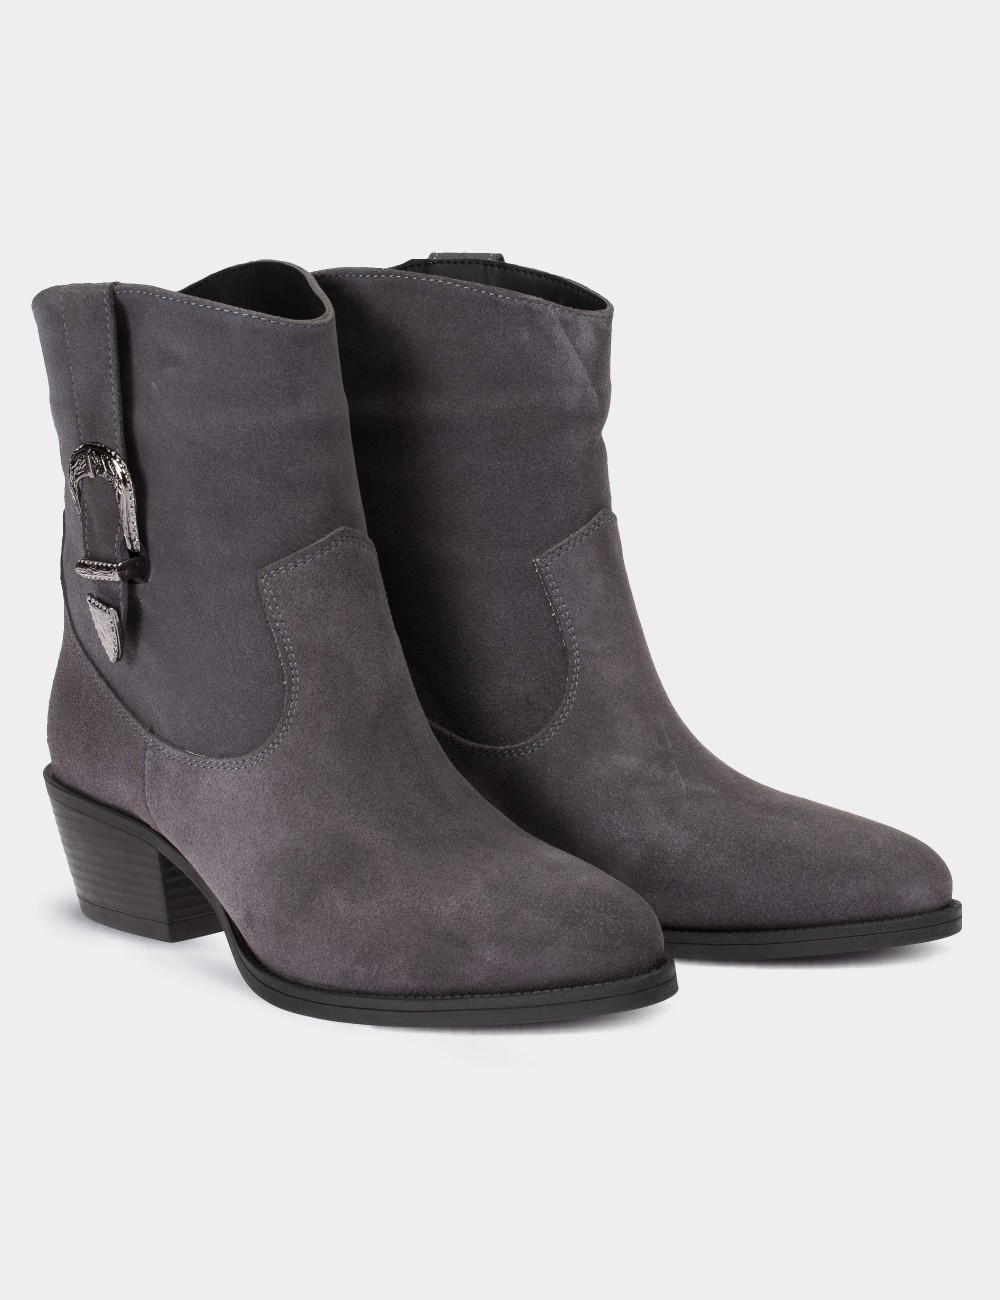 Gray Suede Leather  Boots - E9011ZGRIC01